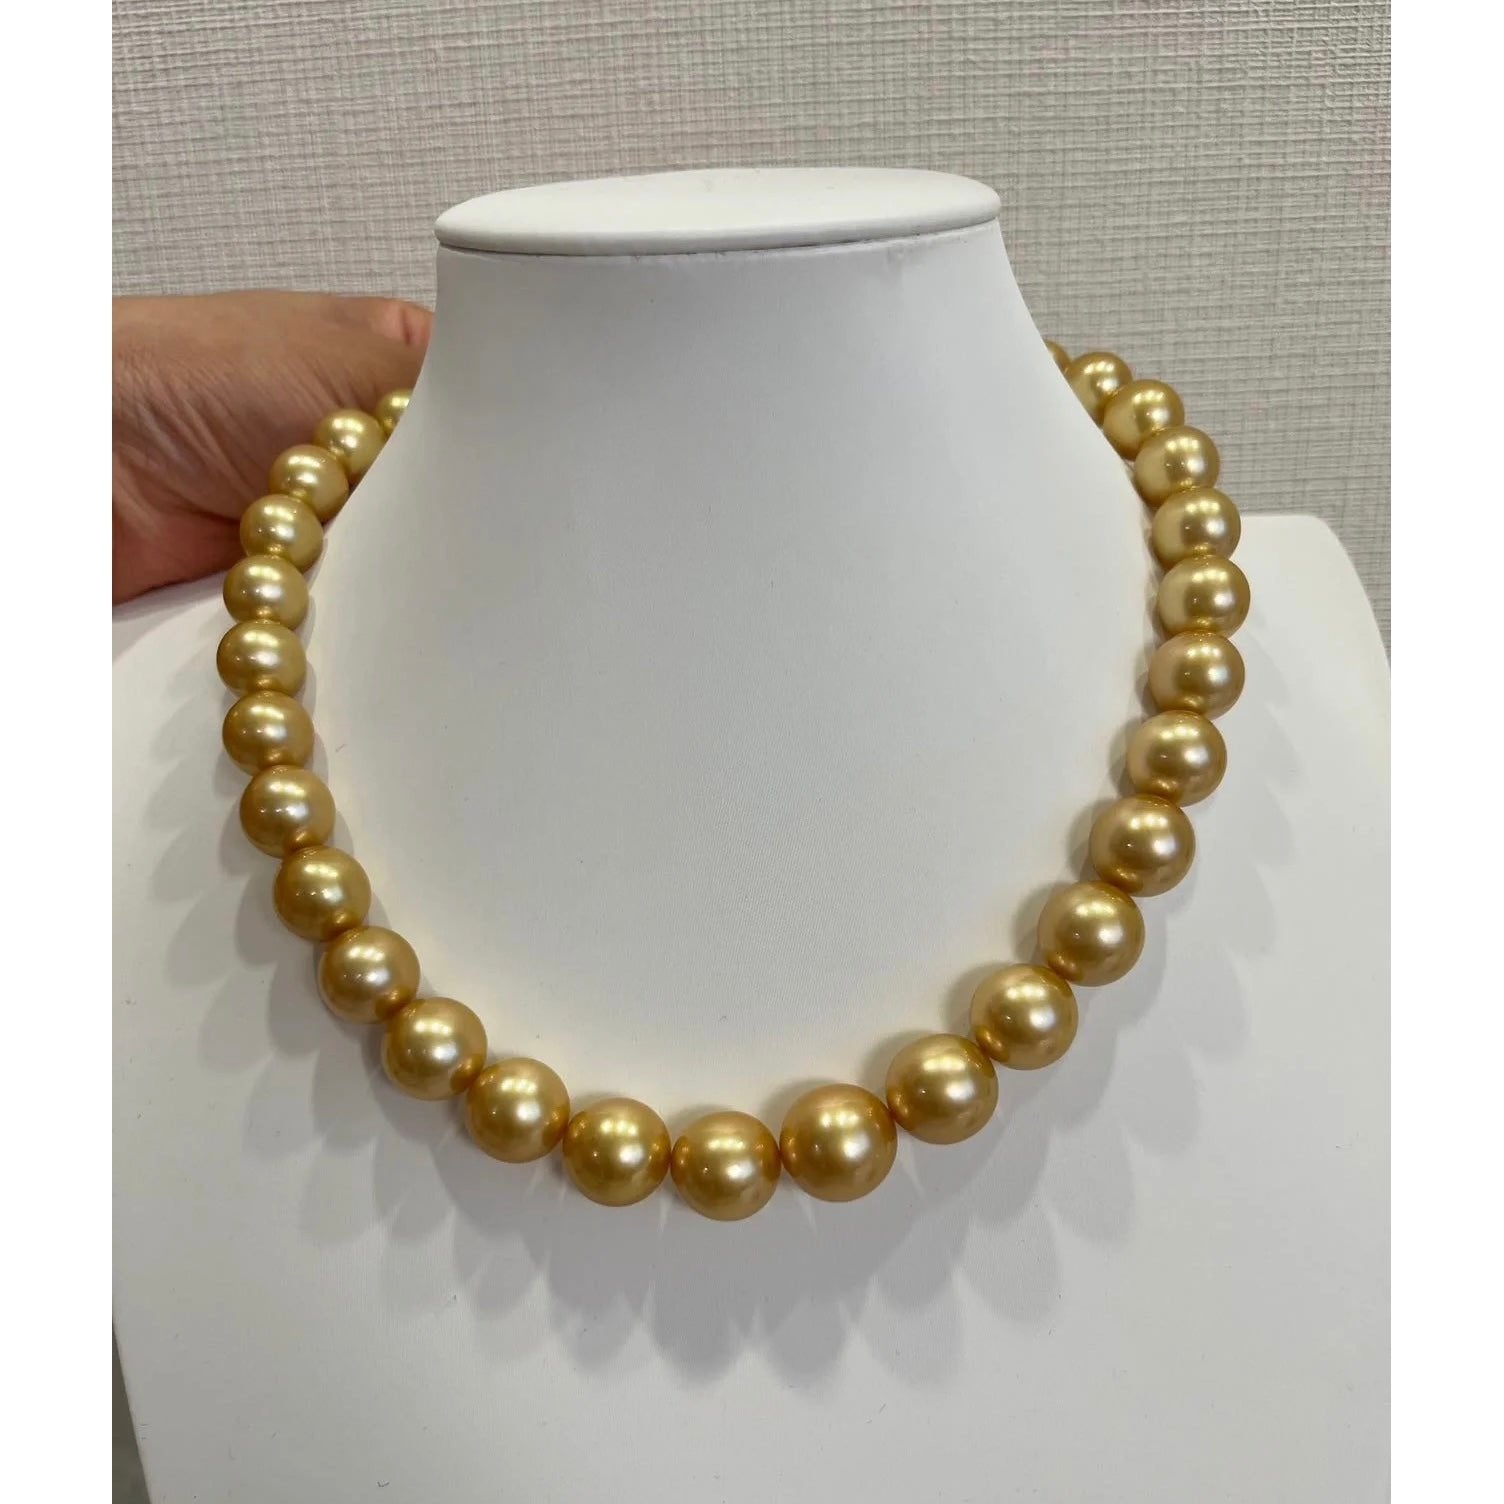 12.2-15.4mm Golden South Sea Round Pearl Necklace - AAA Quality